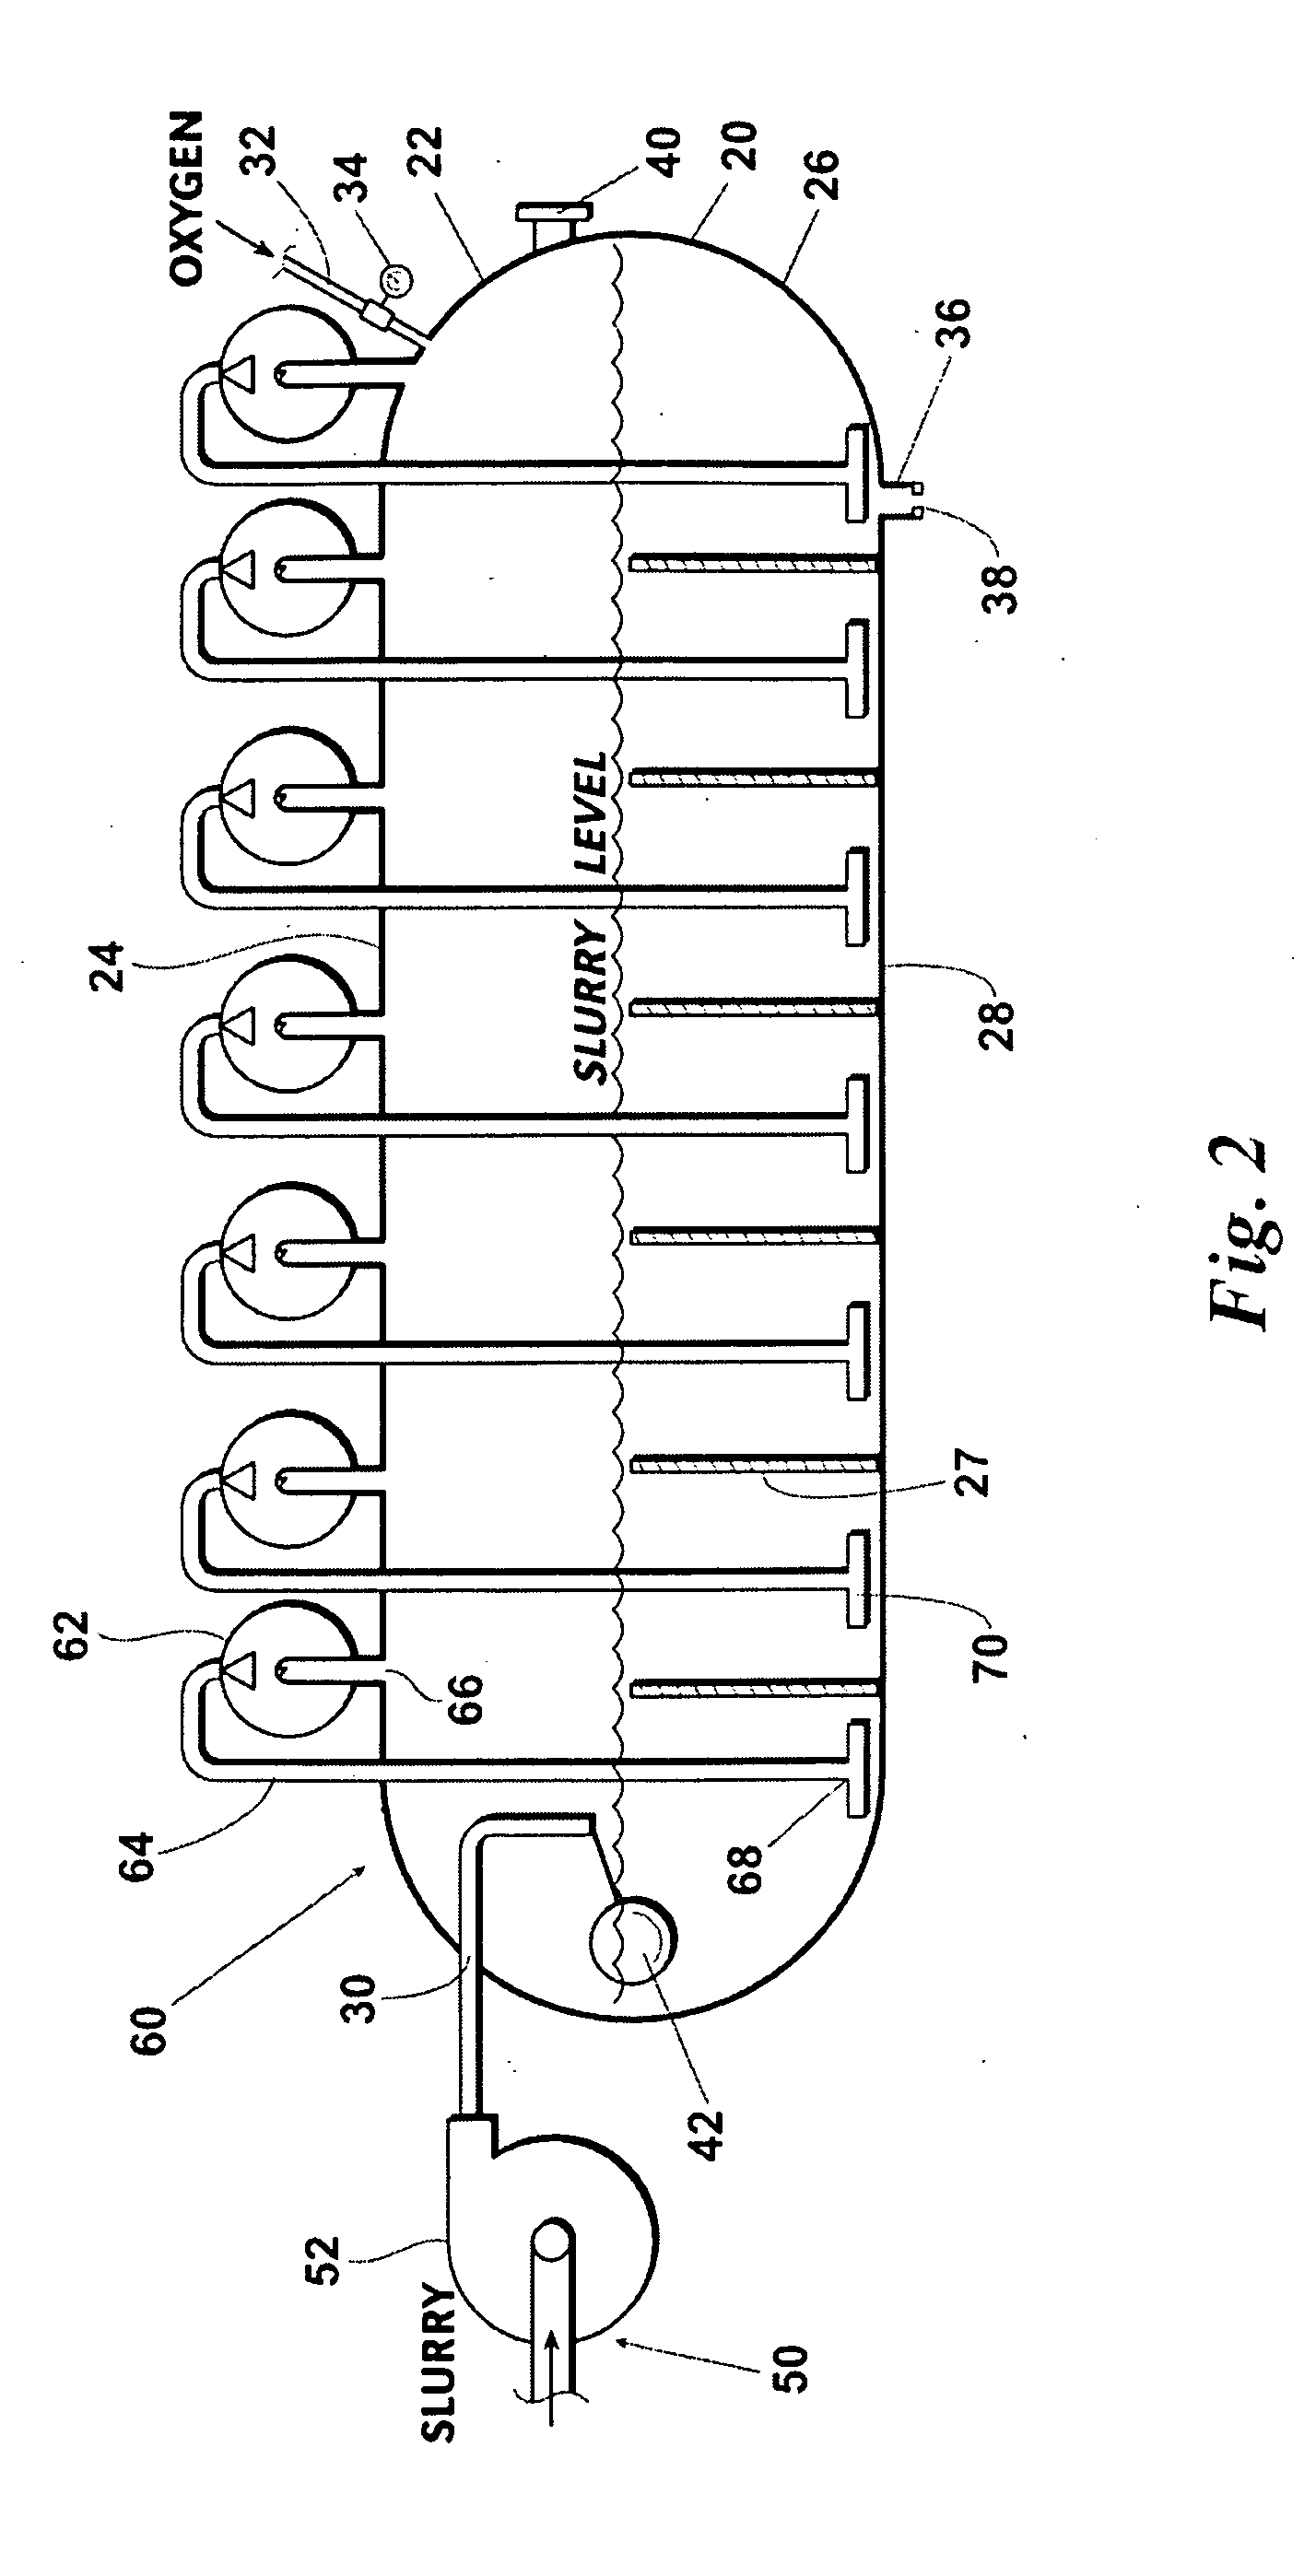 System and Method for Leaching a Metal from a Base Mineral Rock